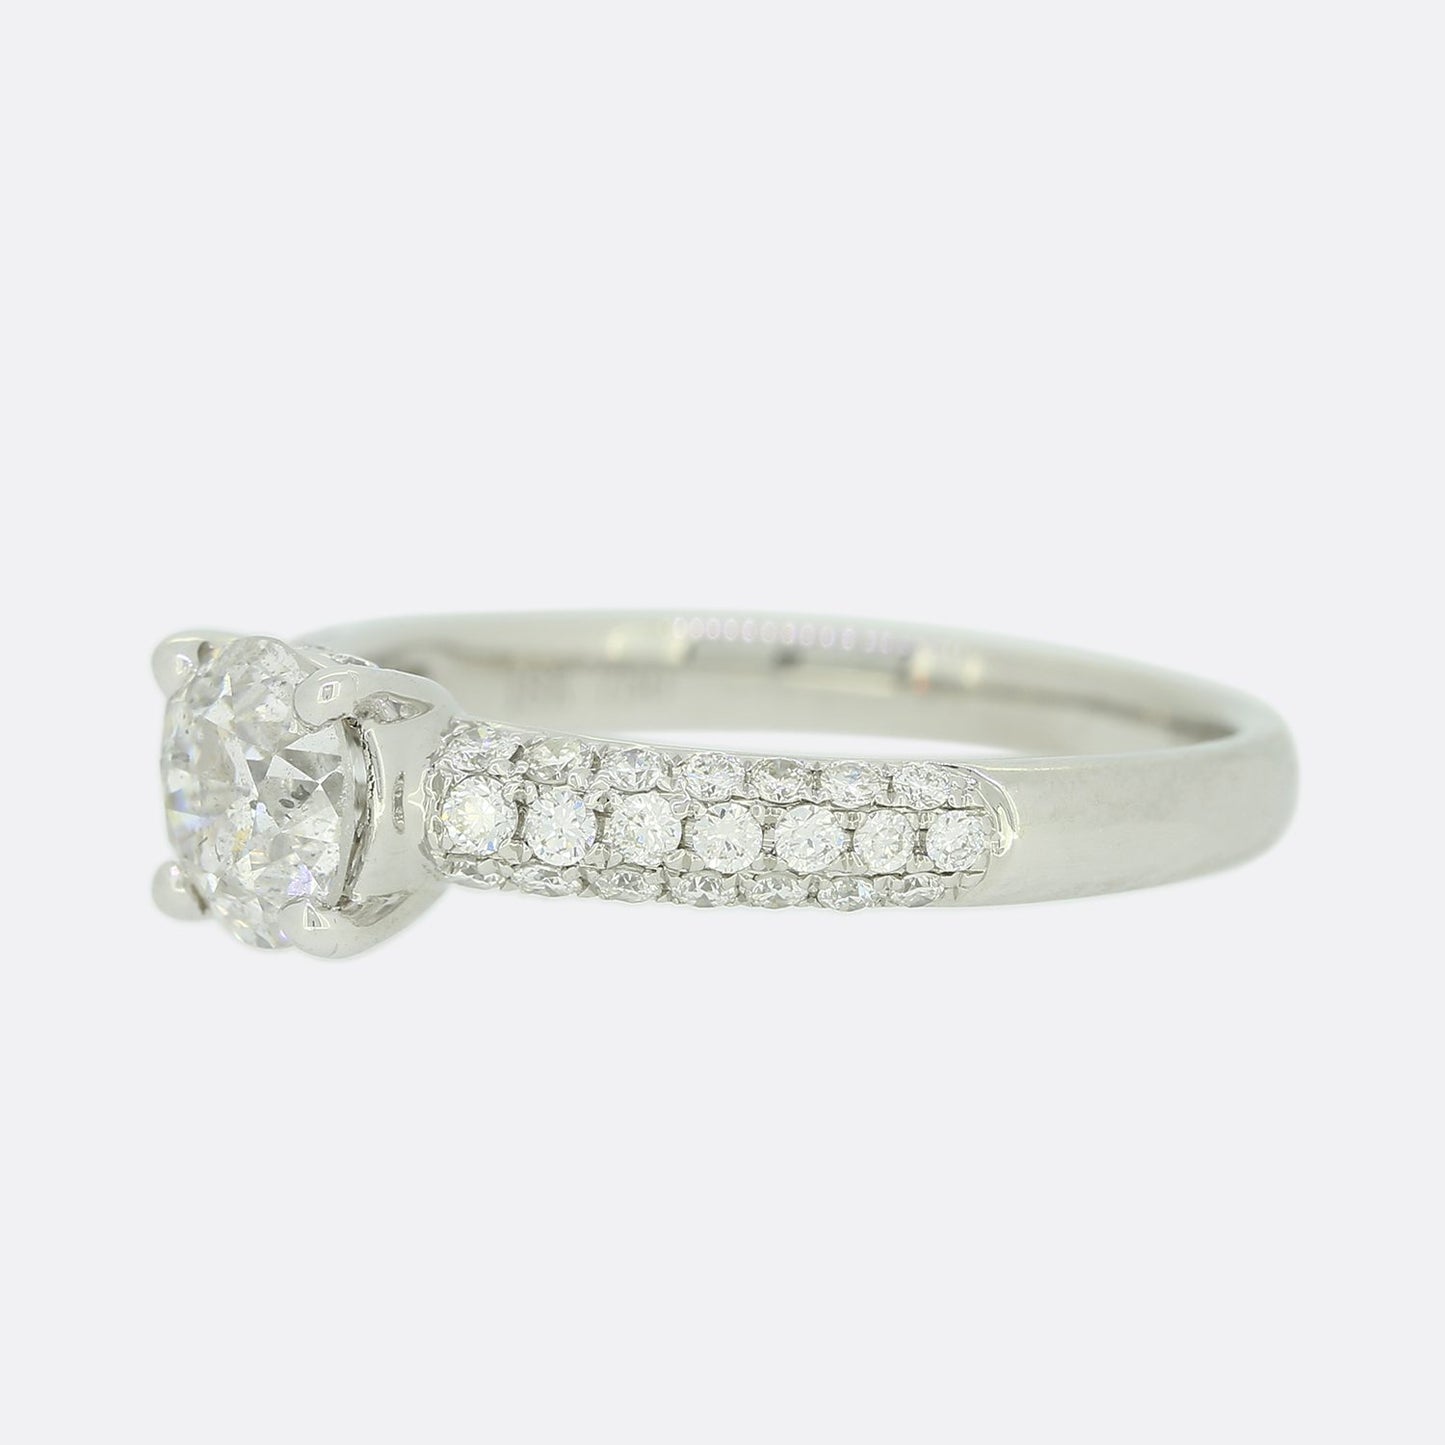 Old Cut 0.74 Carat Diamond Solitaire Engagement Ring